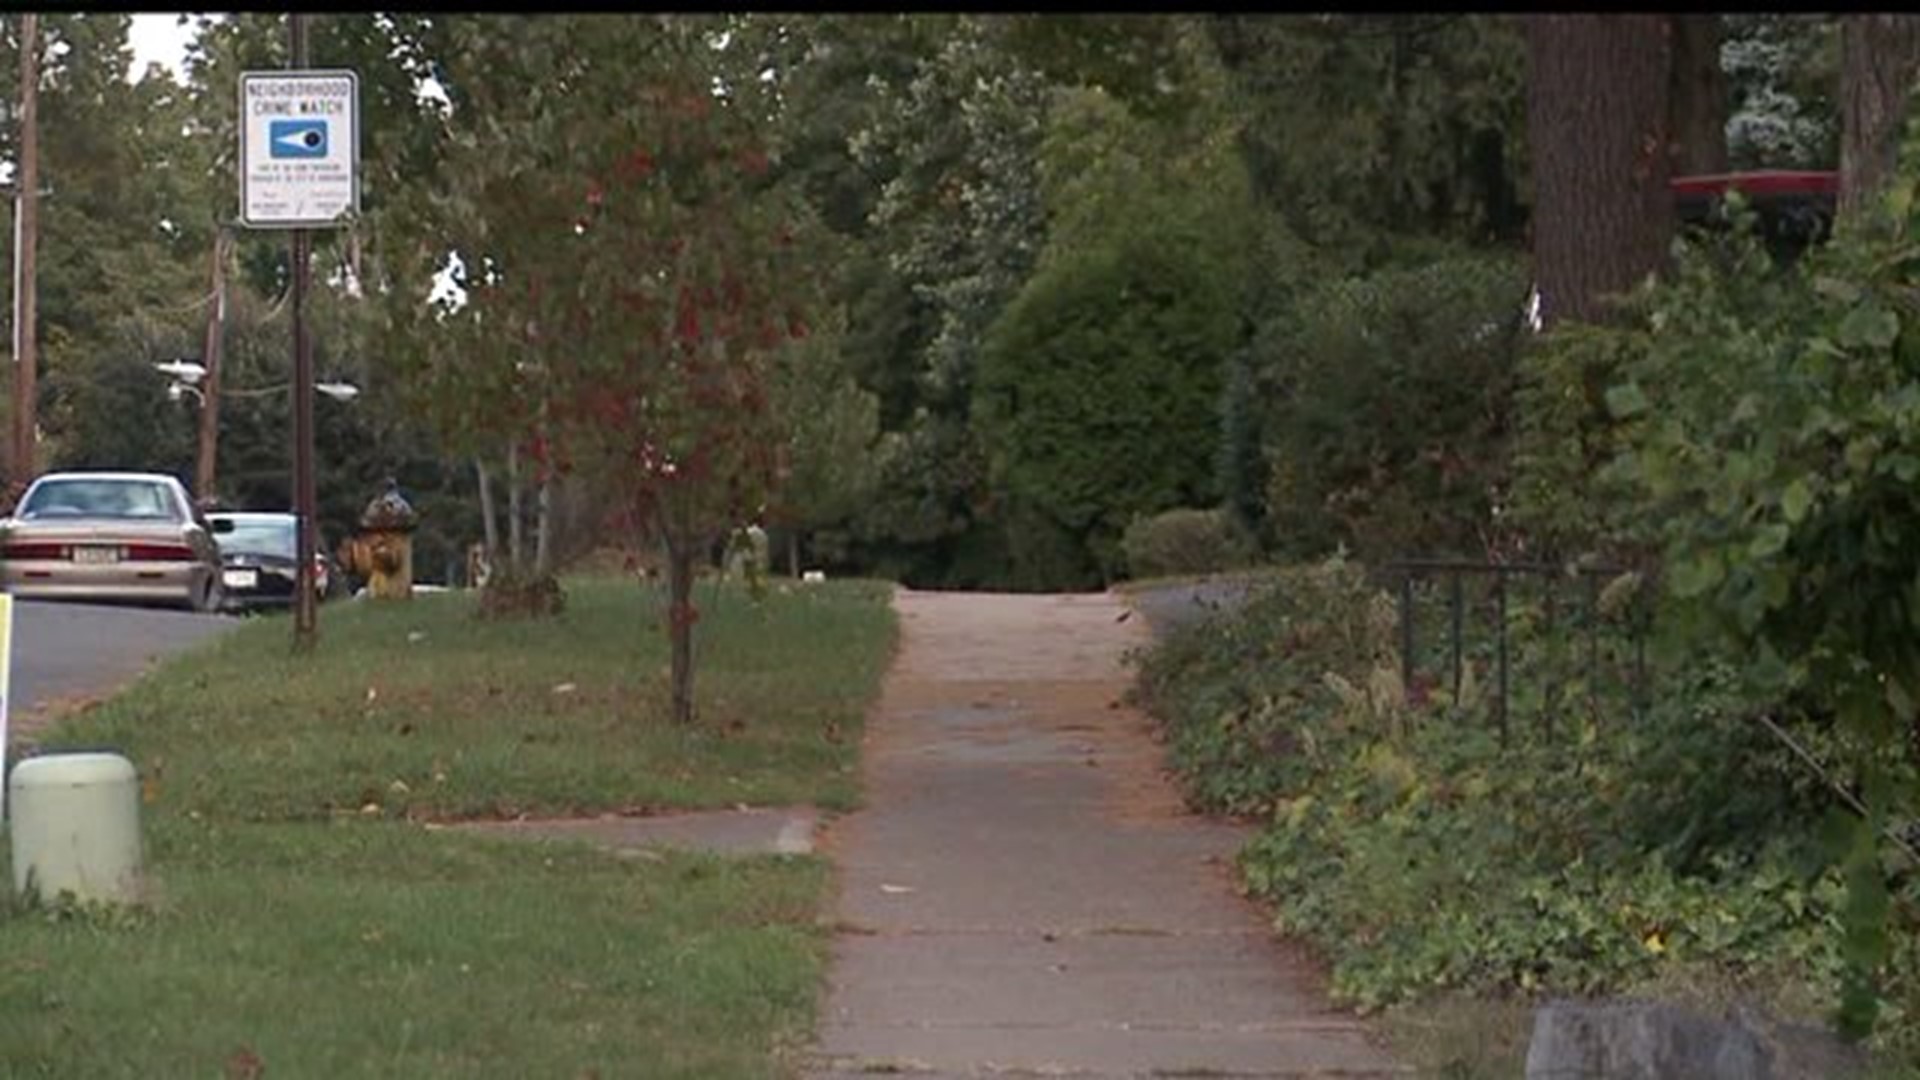 14 Year Old Girl Assaulted On Walk to School